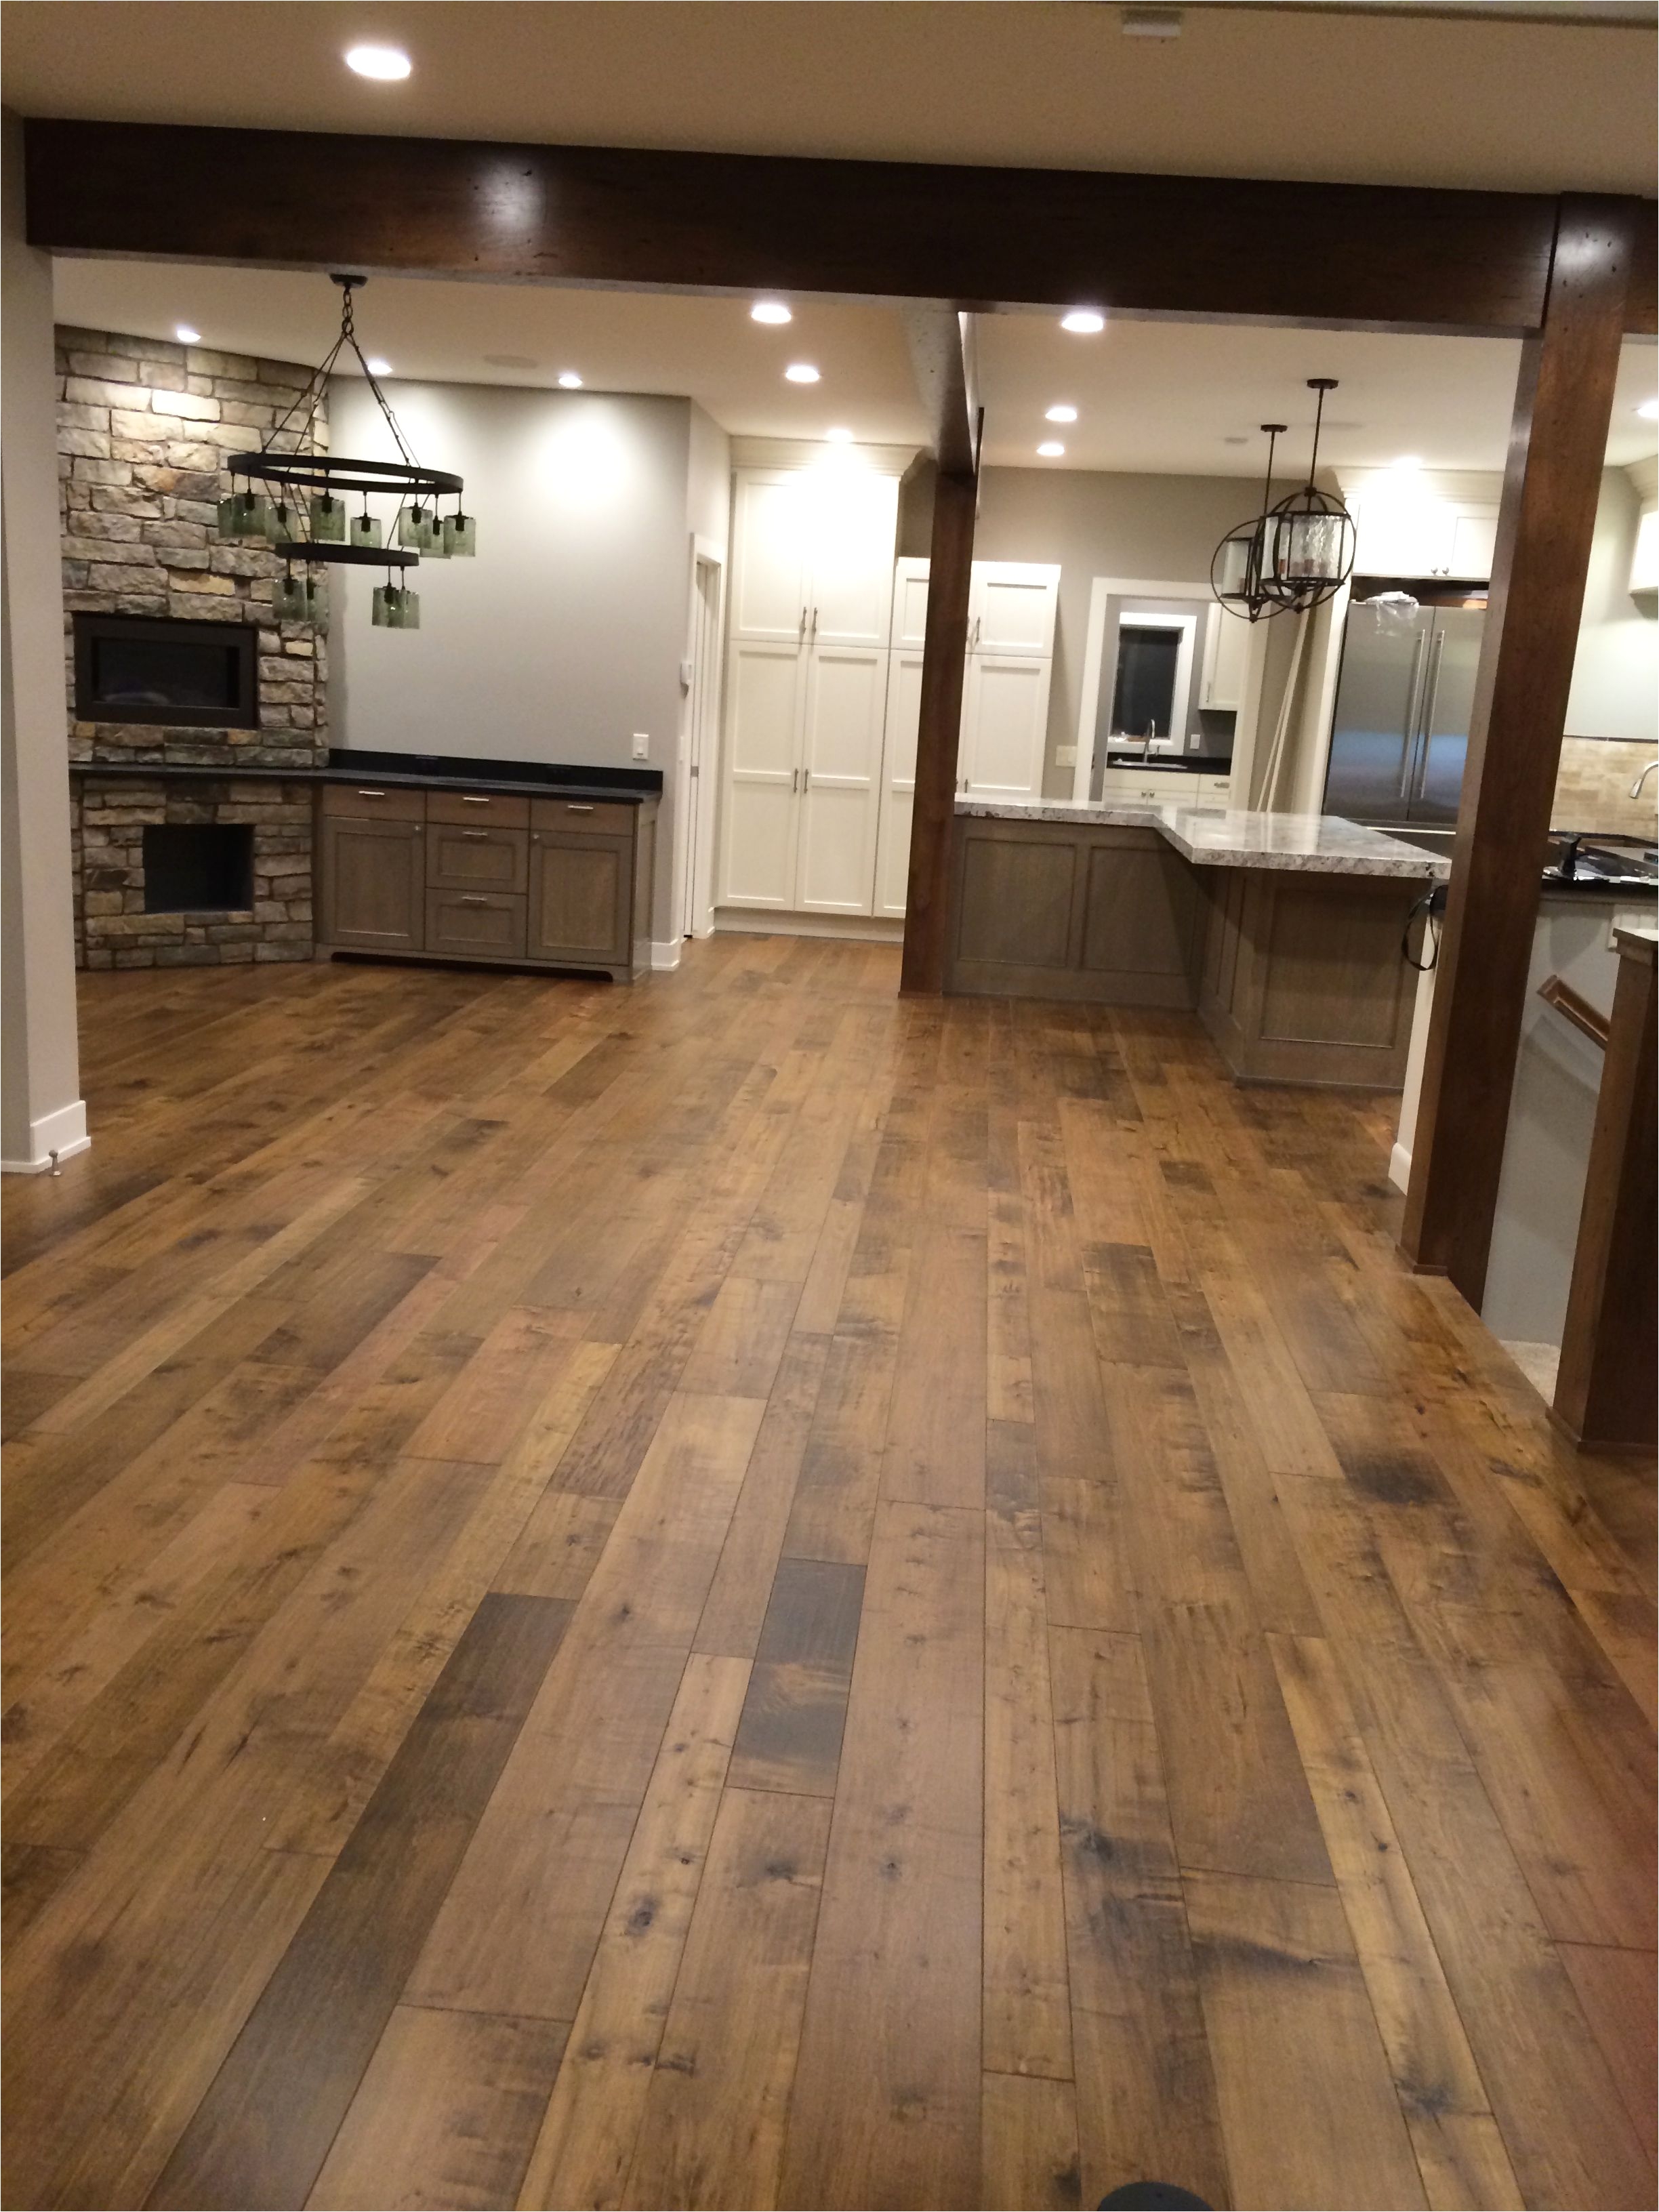 Wood Flooring Stores Jacksonville Fl Monterey Hardwood Collection Rooms and Spaces Pinterest